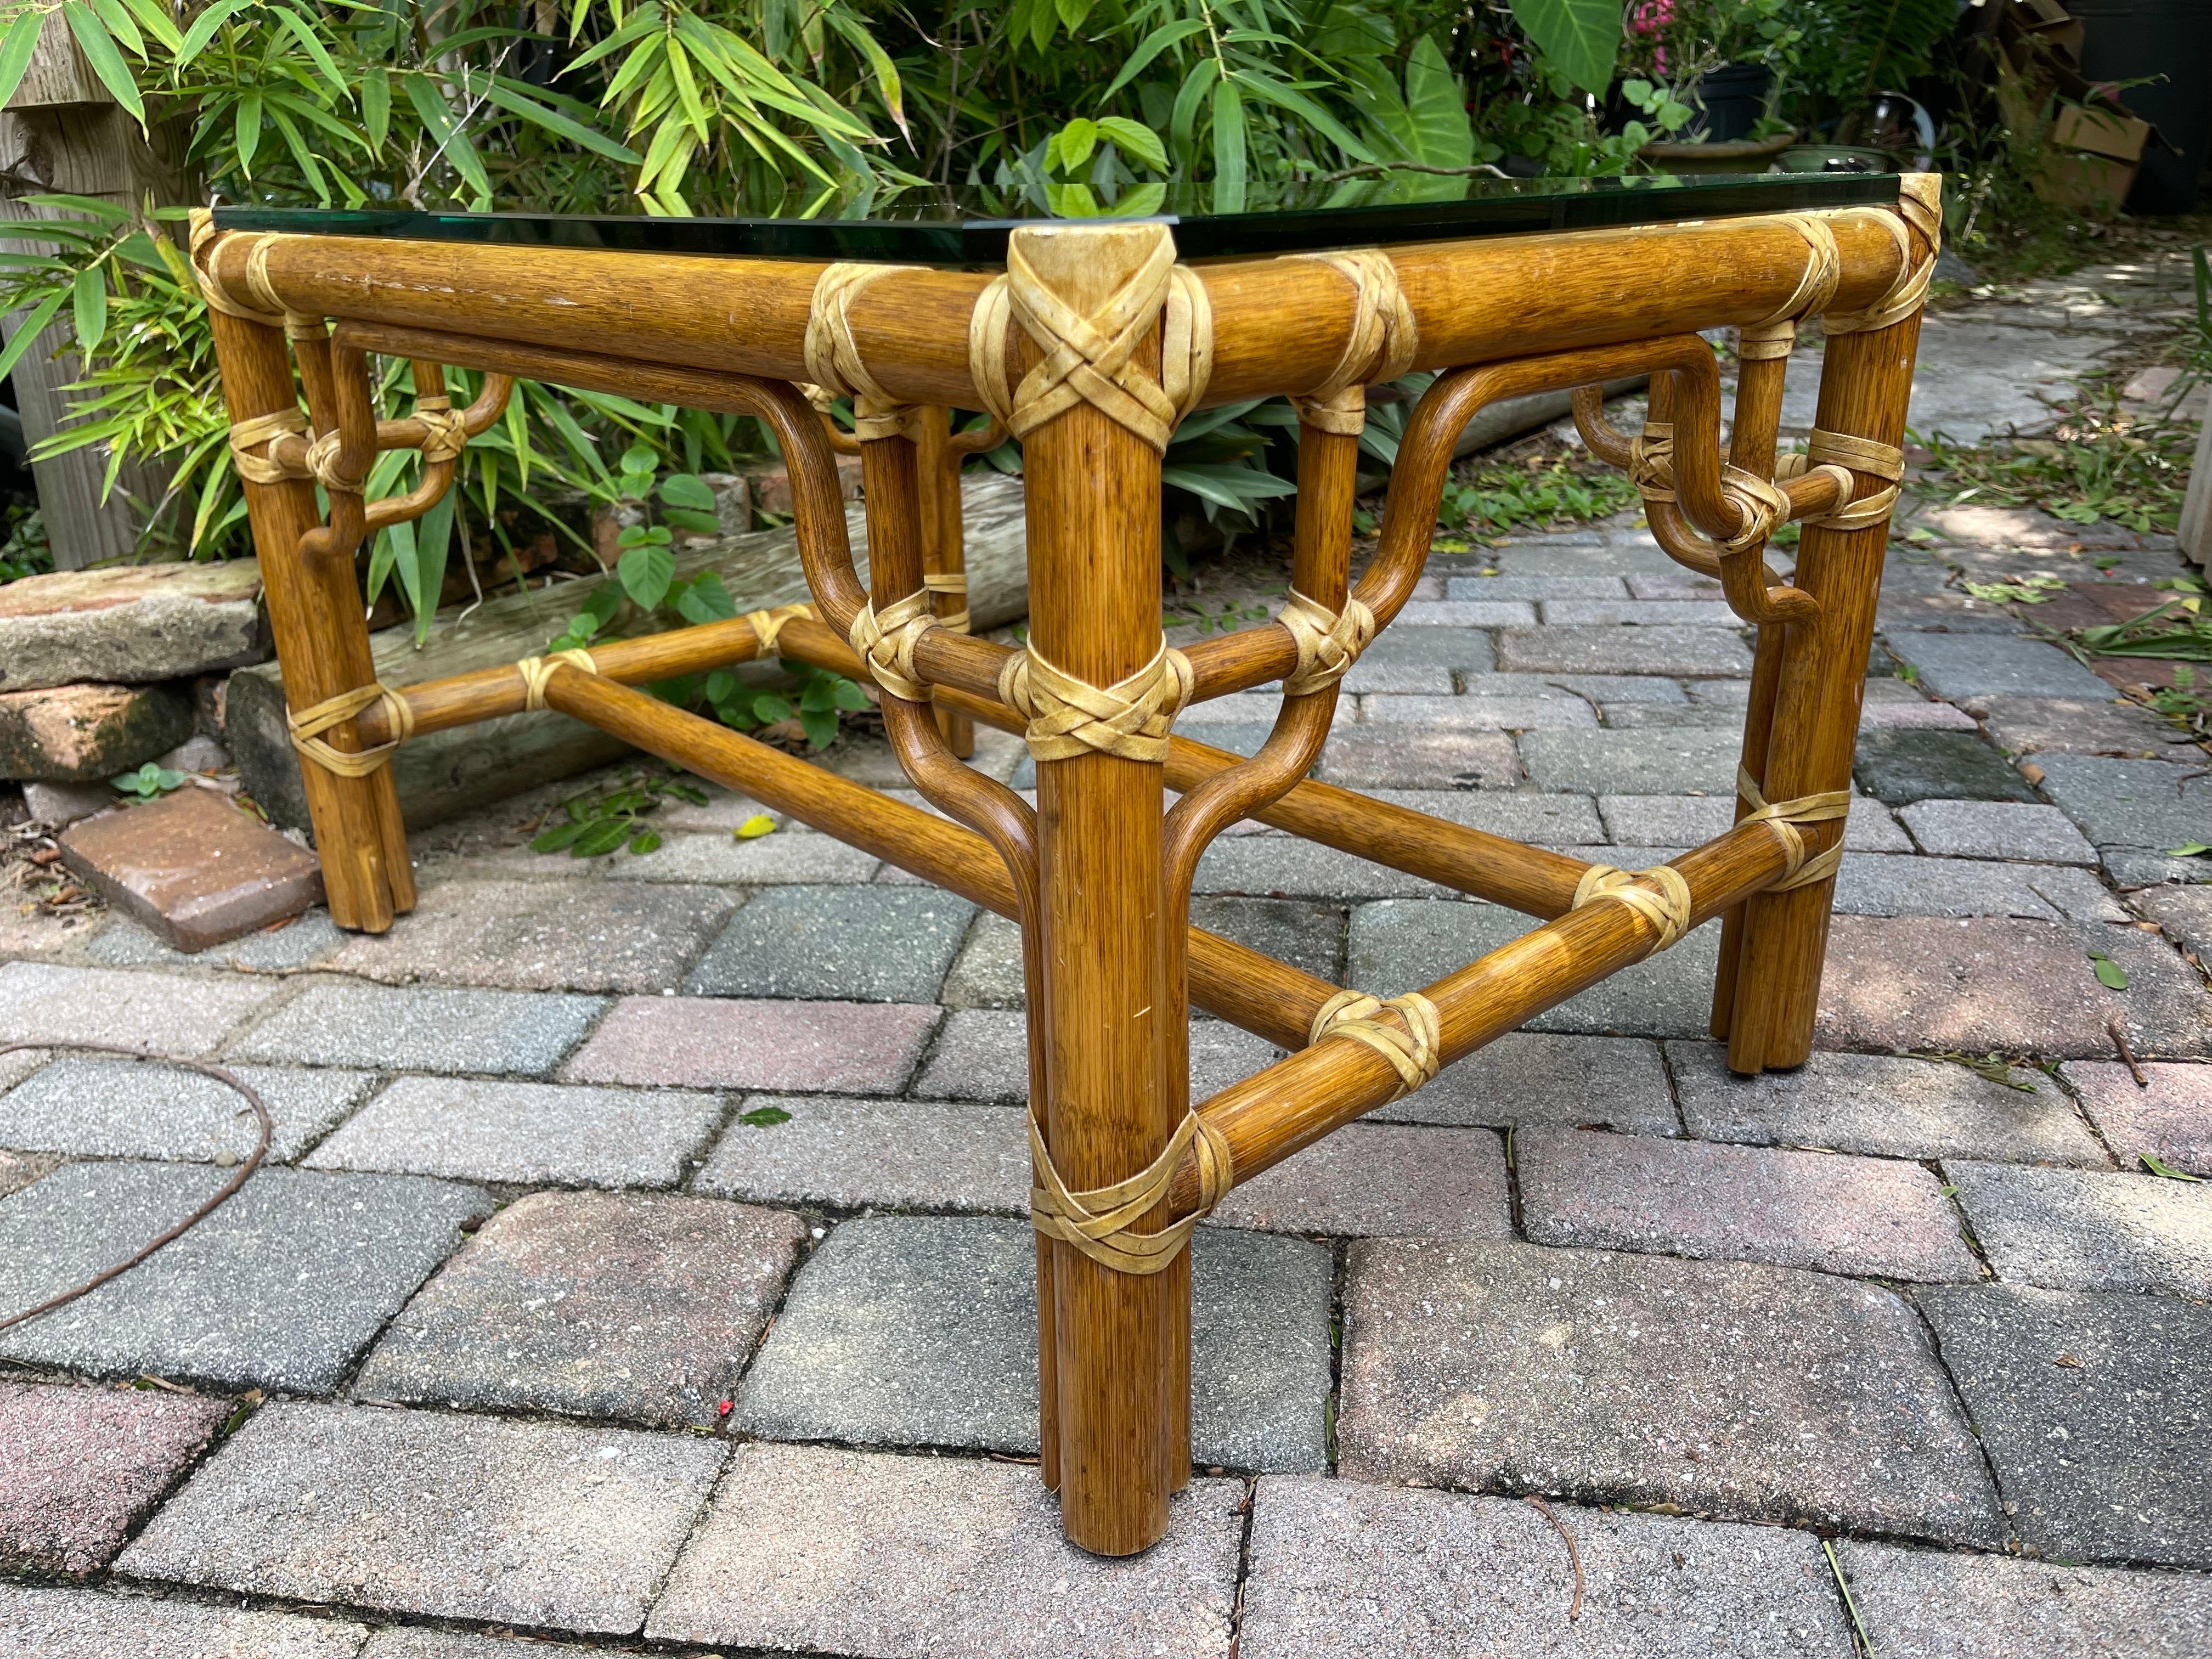 Striking handmade McGuire coffee table with fabulous fretwork detailing. Rattan with rawhide accents, thick glass top. Compact enough for a chic condo, or to complement a menagerie of coffee & cocktail tables in a larger space.